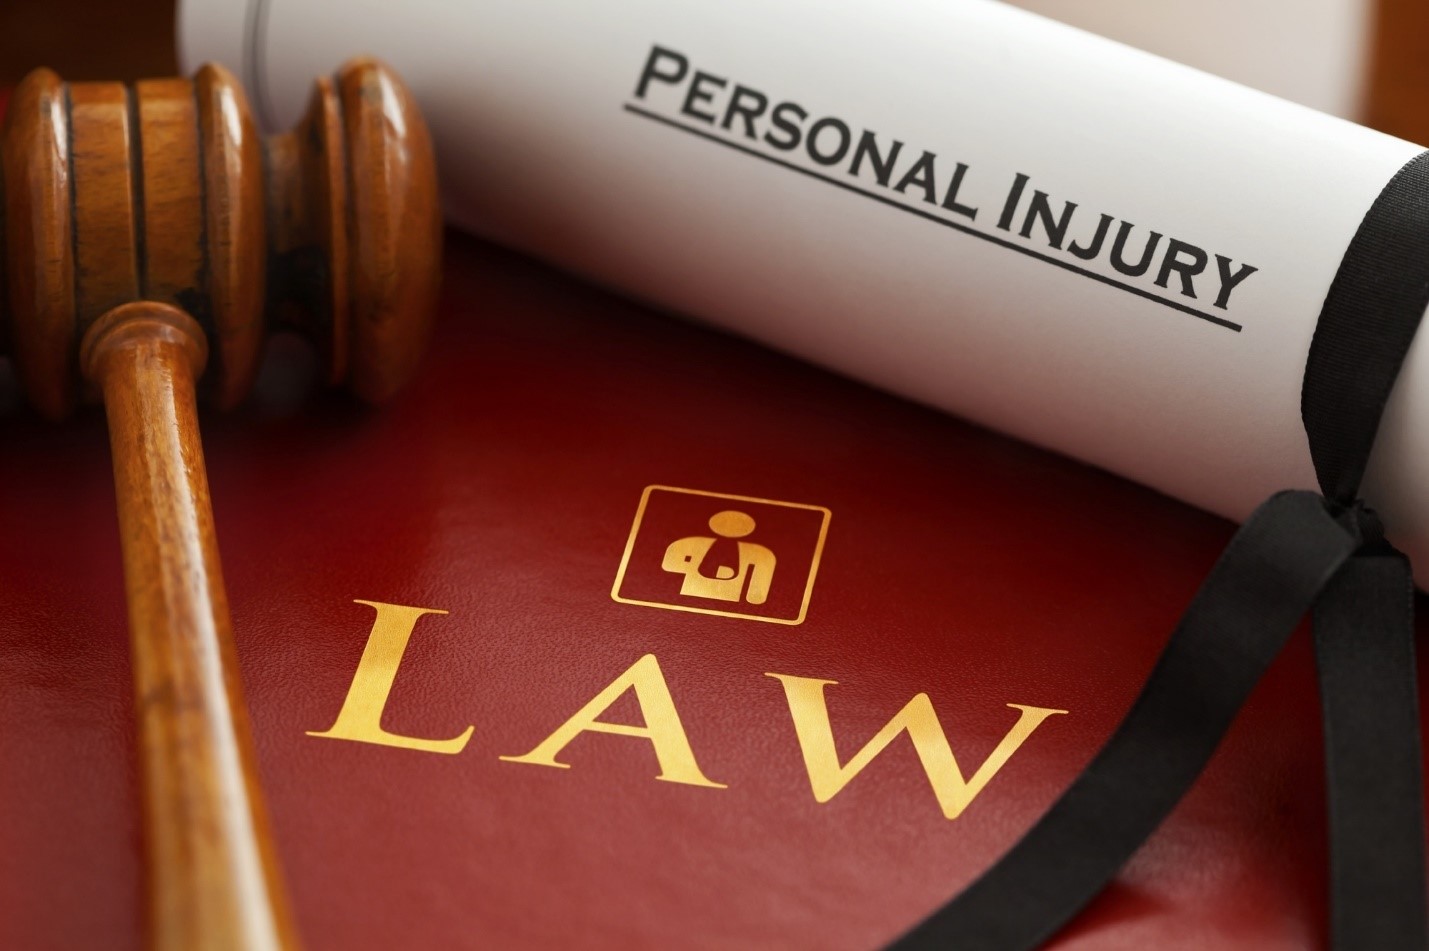 When and Why Should You Hire a Personal Injury Lawyer?